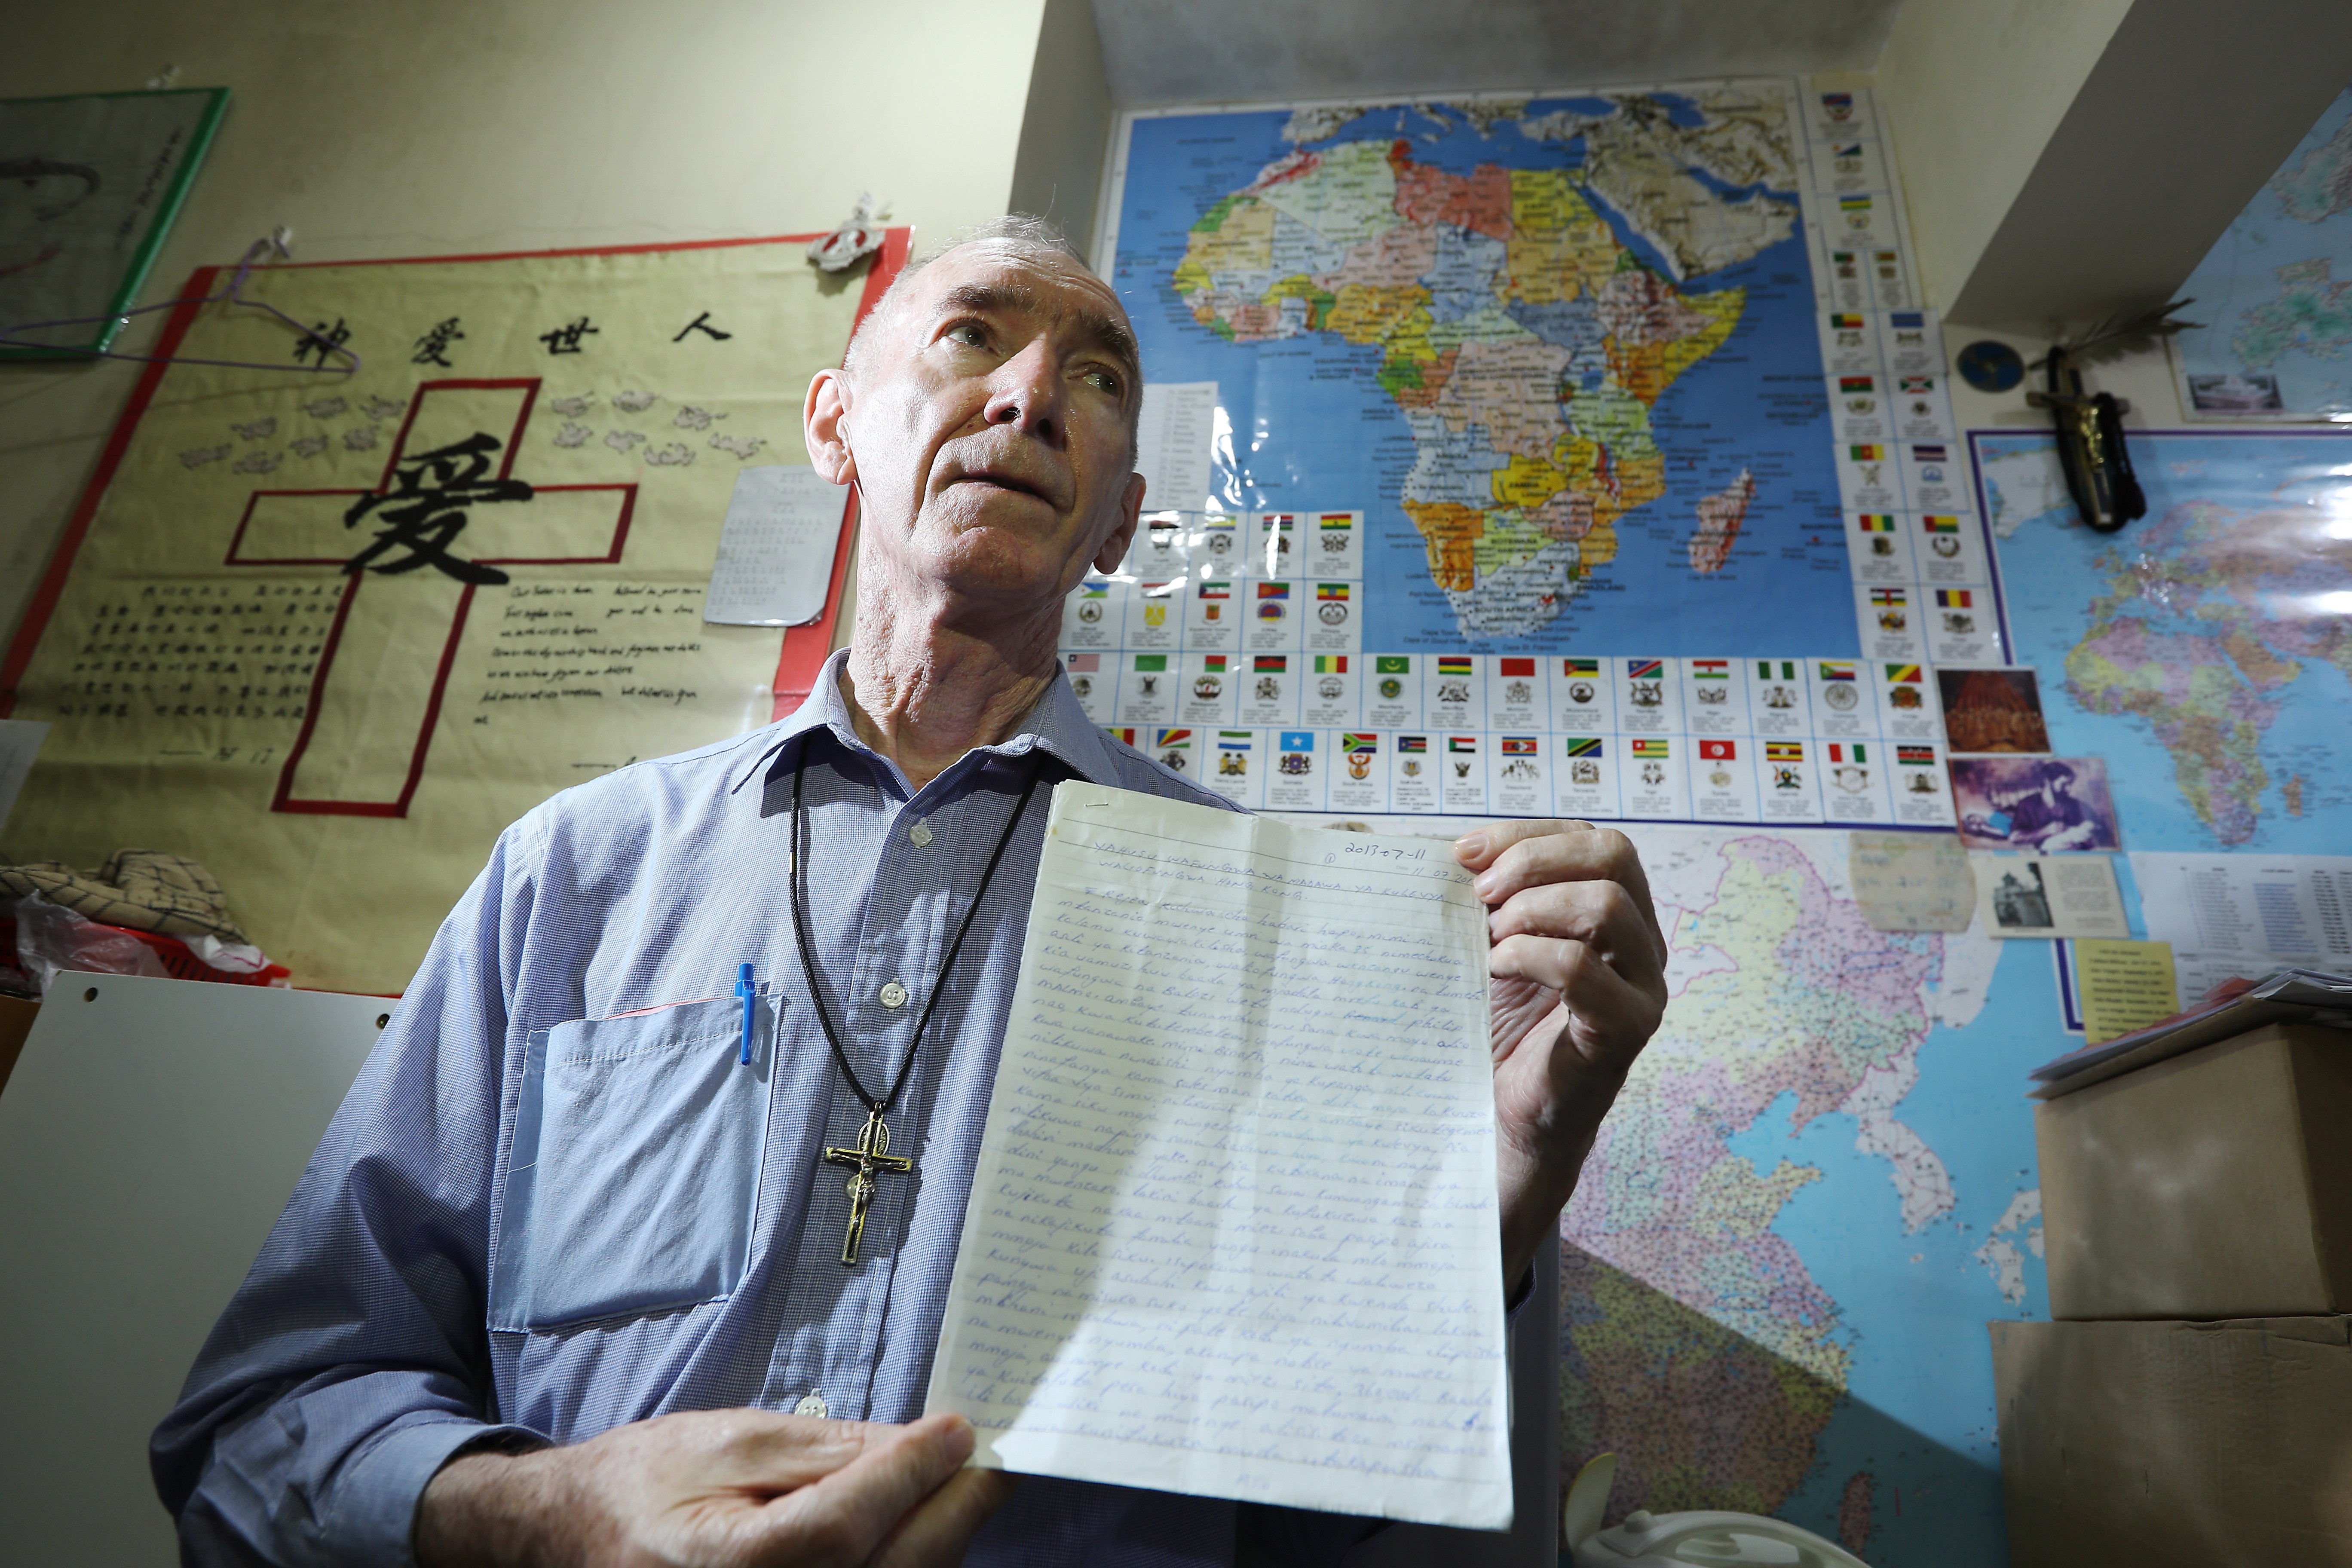 Father John Wotherspoon’s mission started in 2013 when he convinced a Tanzanian drug mule to write a letter home warning others not to follow his example. Photo: Nora Tam